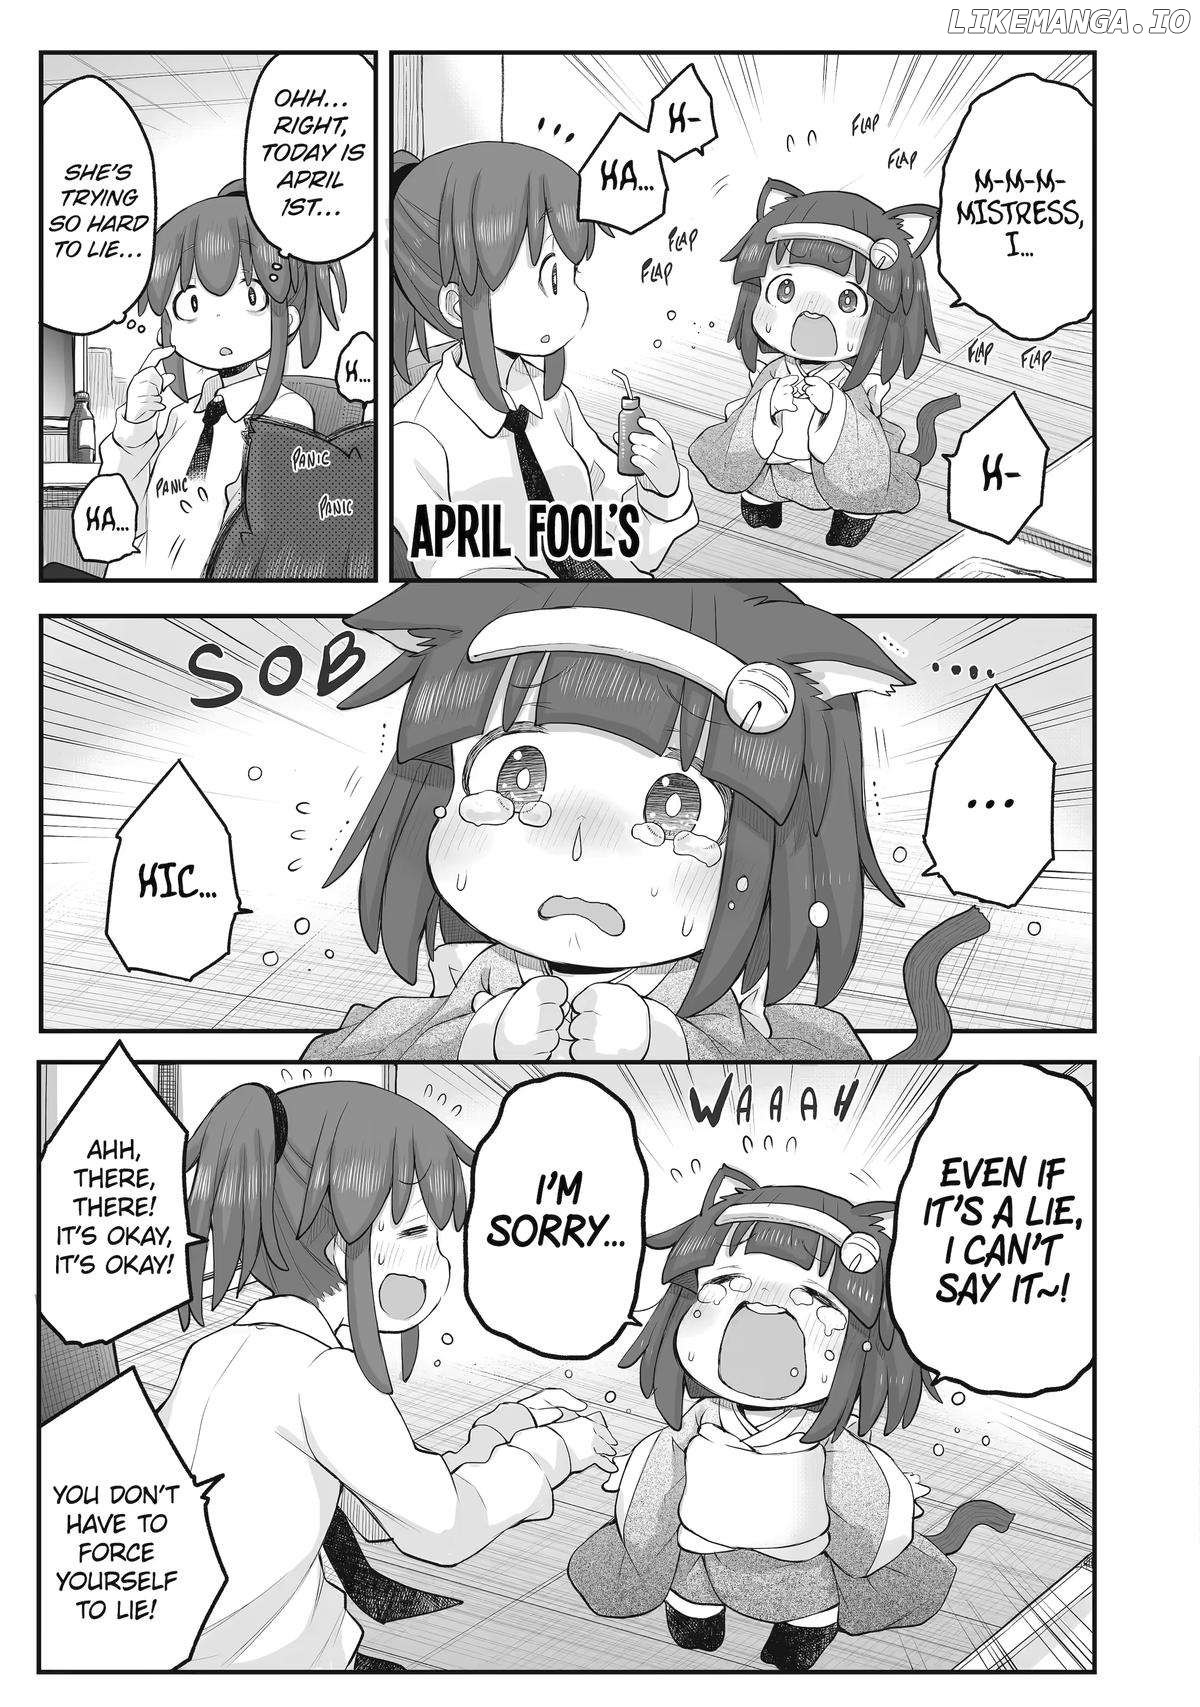 Ms. Corporate Slave Wants to be Healed by a Loli Spirit - chapter 100 - #1